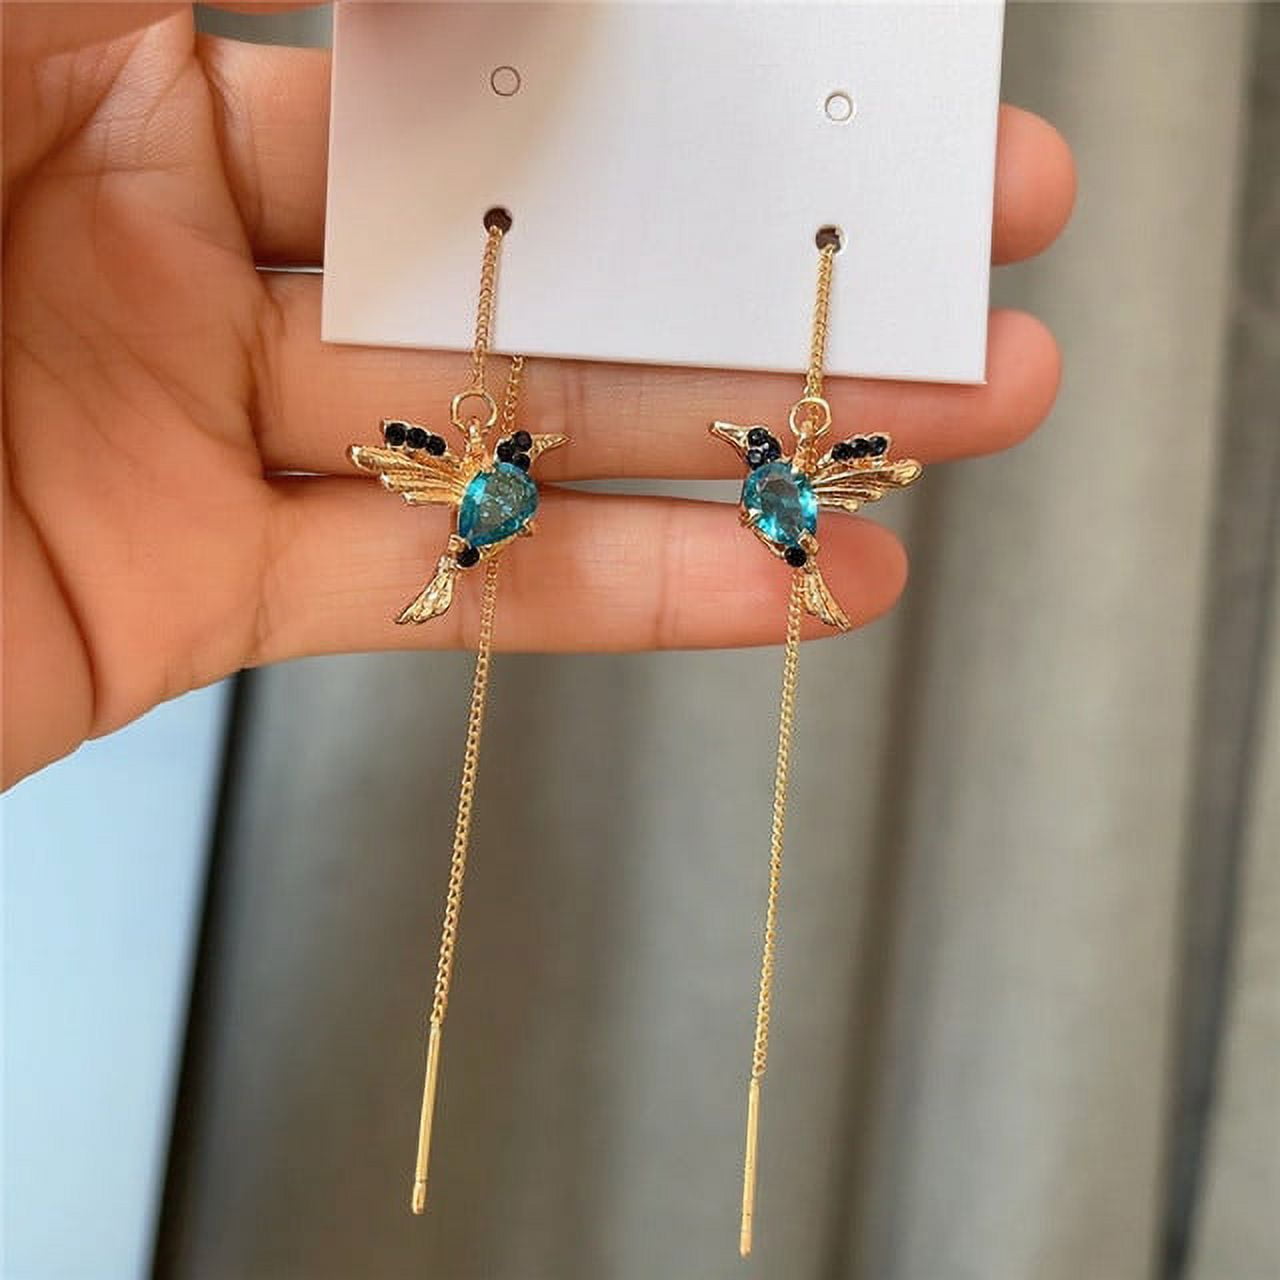 How to Wear Different Types of Earrings (and look great)